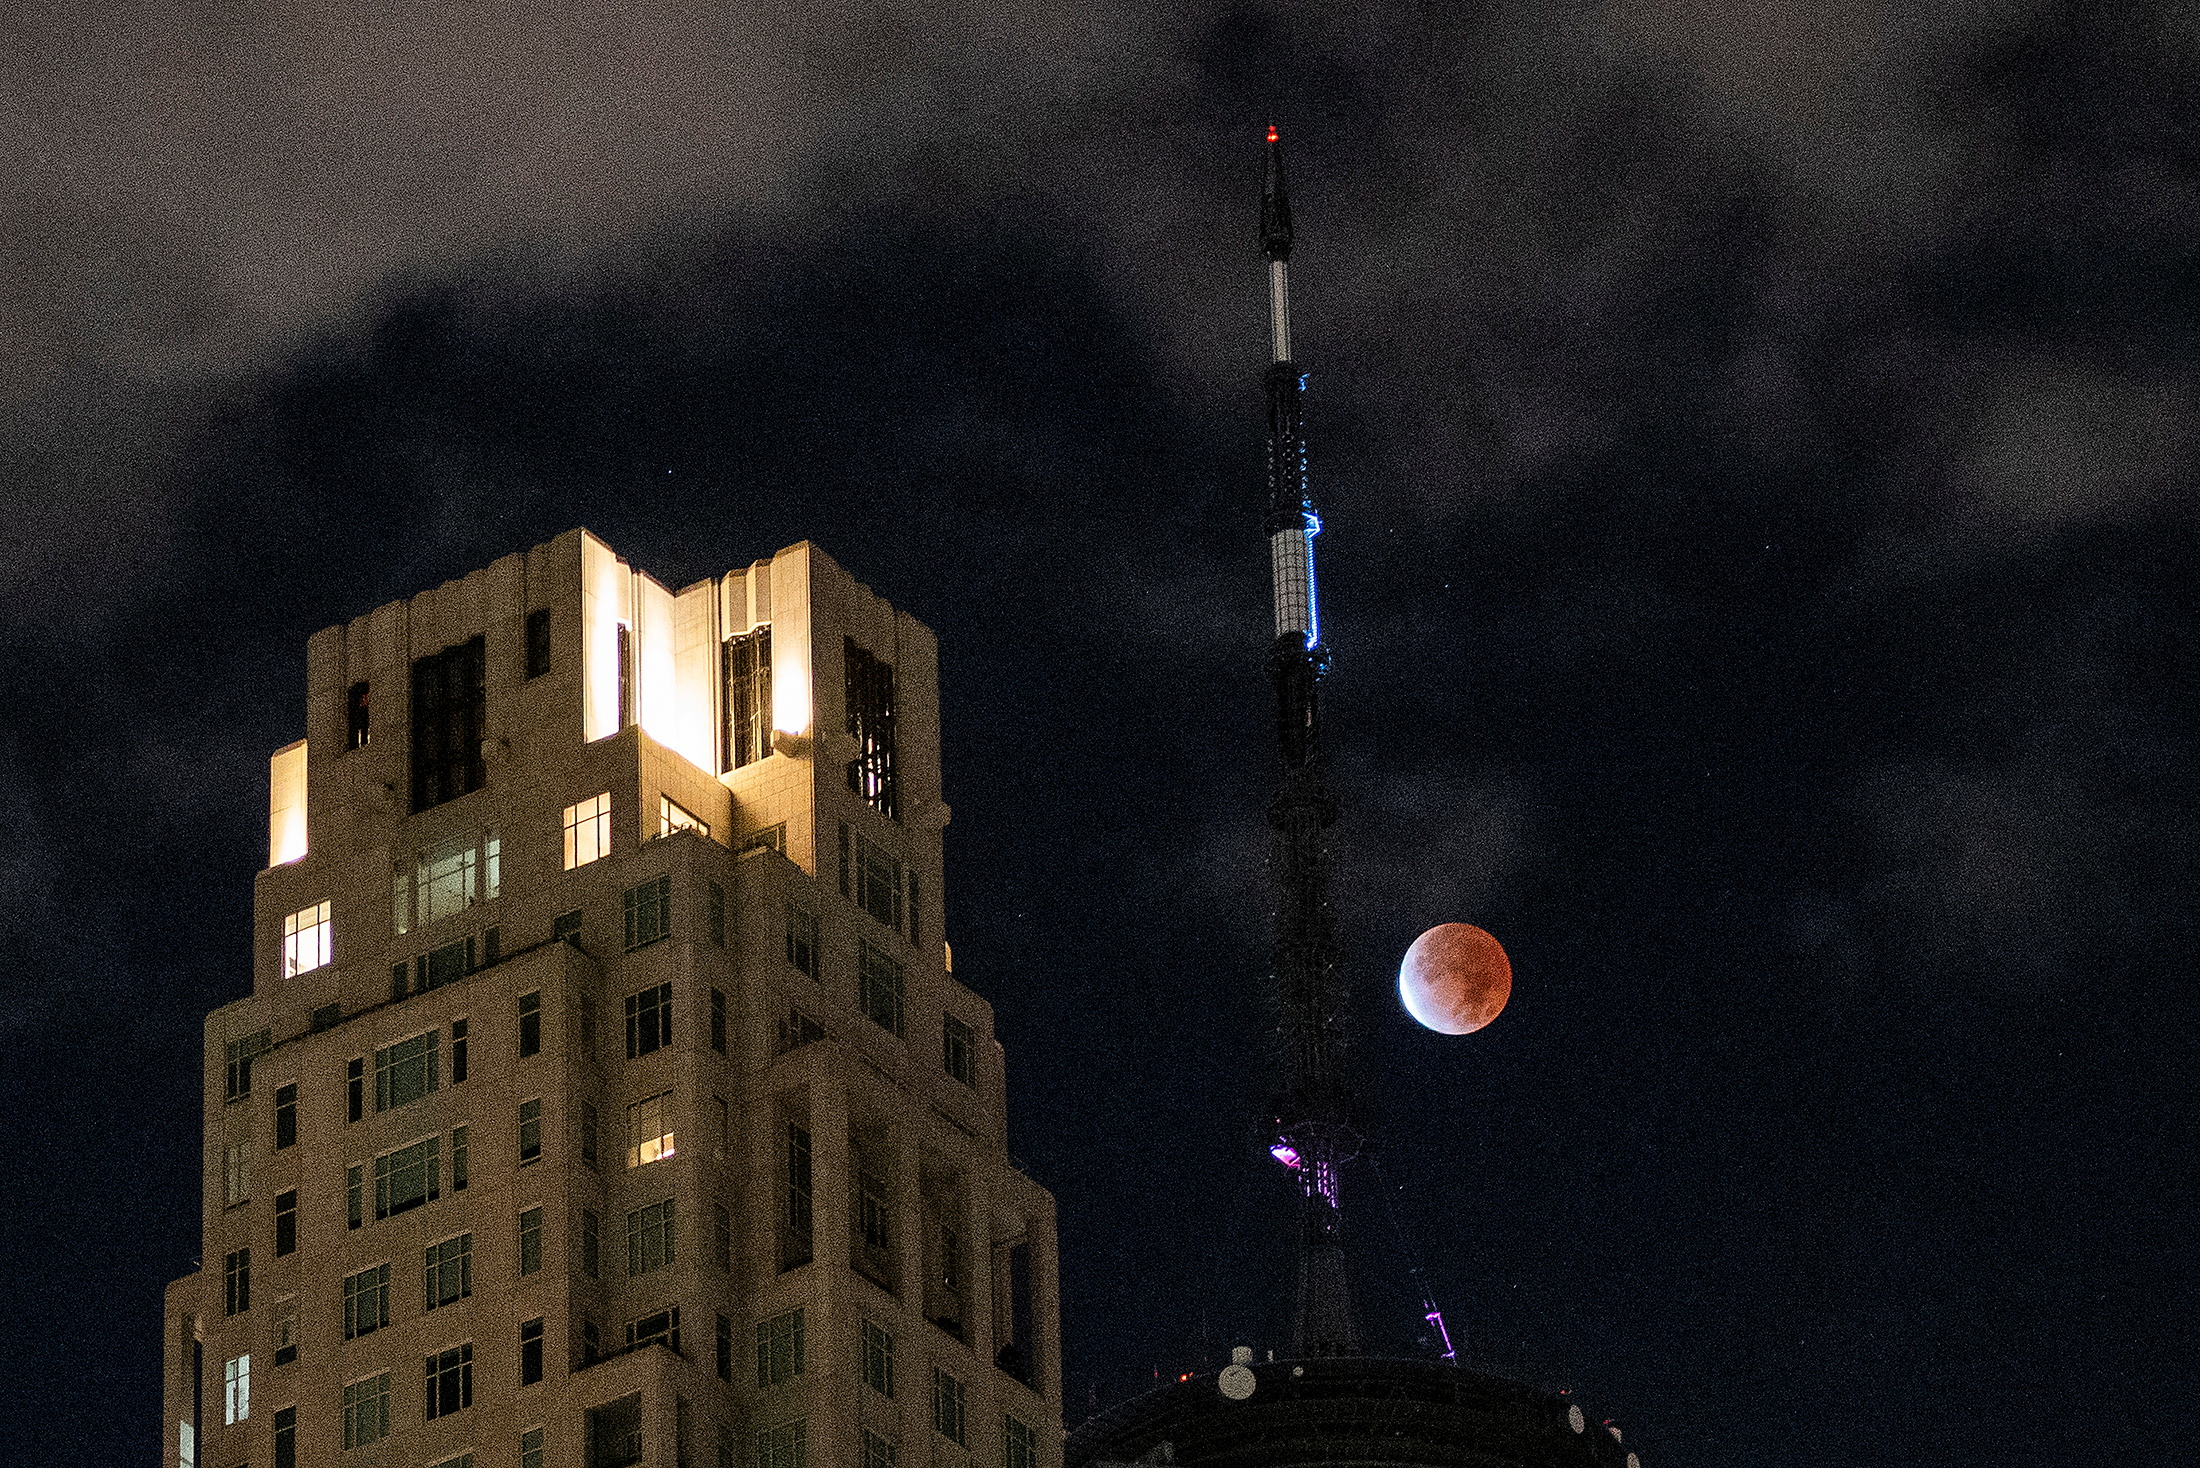 The "Moon of blood" is seen next to the antenna atop the World Trade Center in New York (REUTERS/Eduardo Munoz)